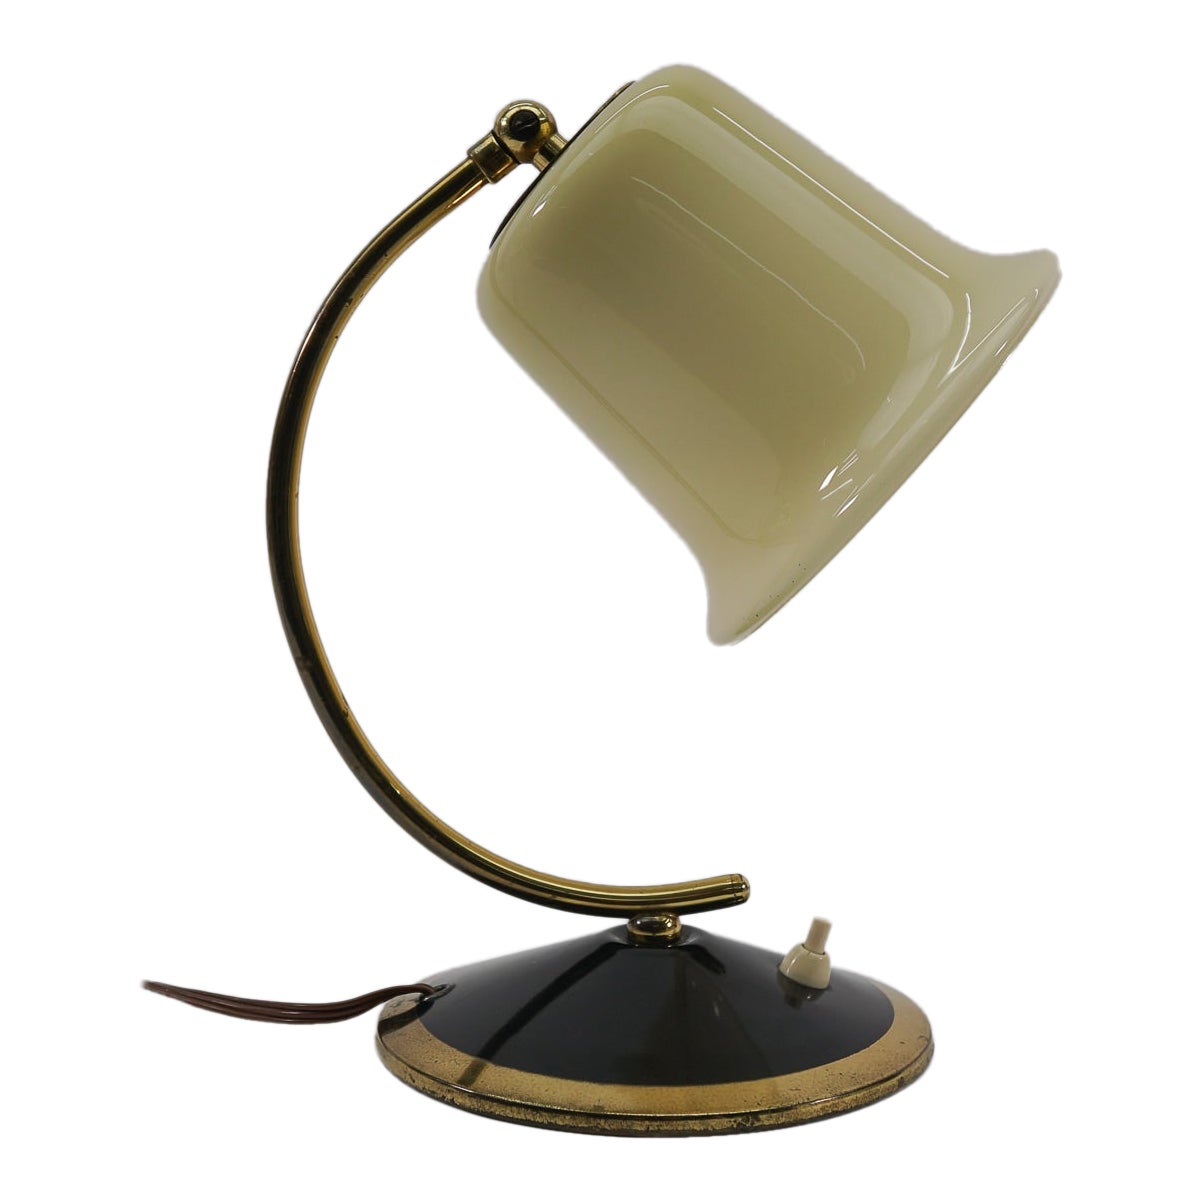 Lovely Midcentury Table Lampe Made in Glass and Brass, 1950s, Austria For Sale